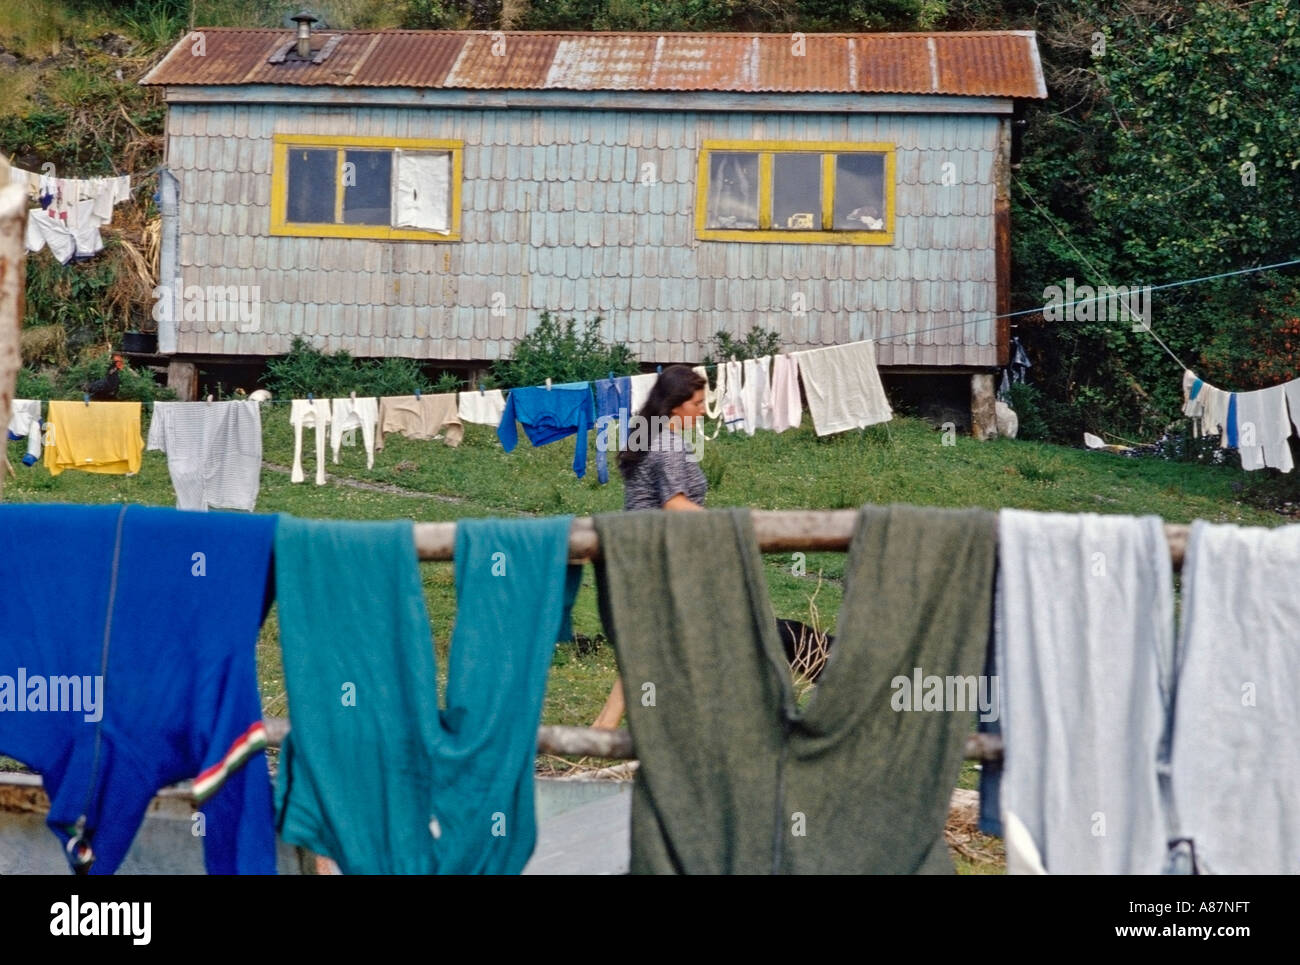 Clothes hanging in the yard of a typical home in La Arena Patagonia Chile with a Chilean woman walking through yard Stock Photo